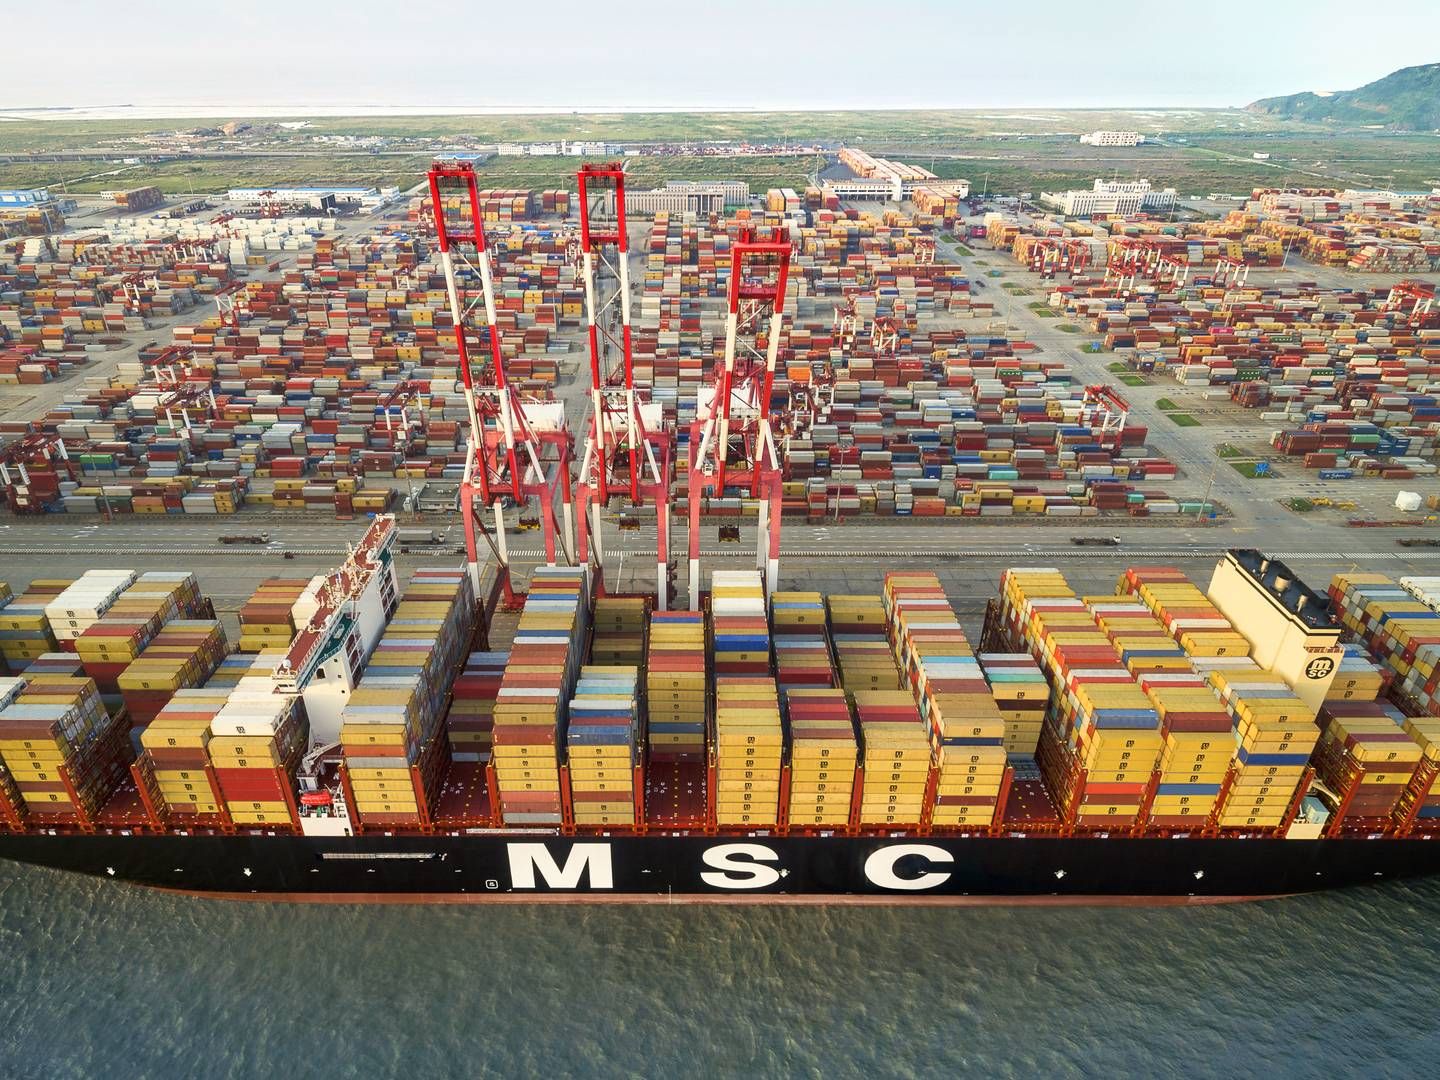 MSC, the world's largest container line, has ordered 66 new ships with a total capacity of 1.1 million teu, corresponding to 25.4 percent of the existing fleet, according to Alphaliner. | Photo: MSC